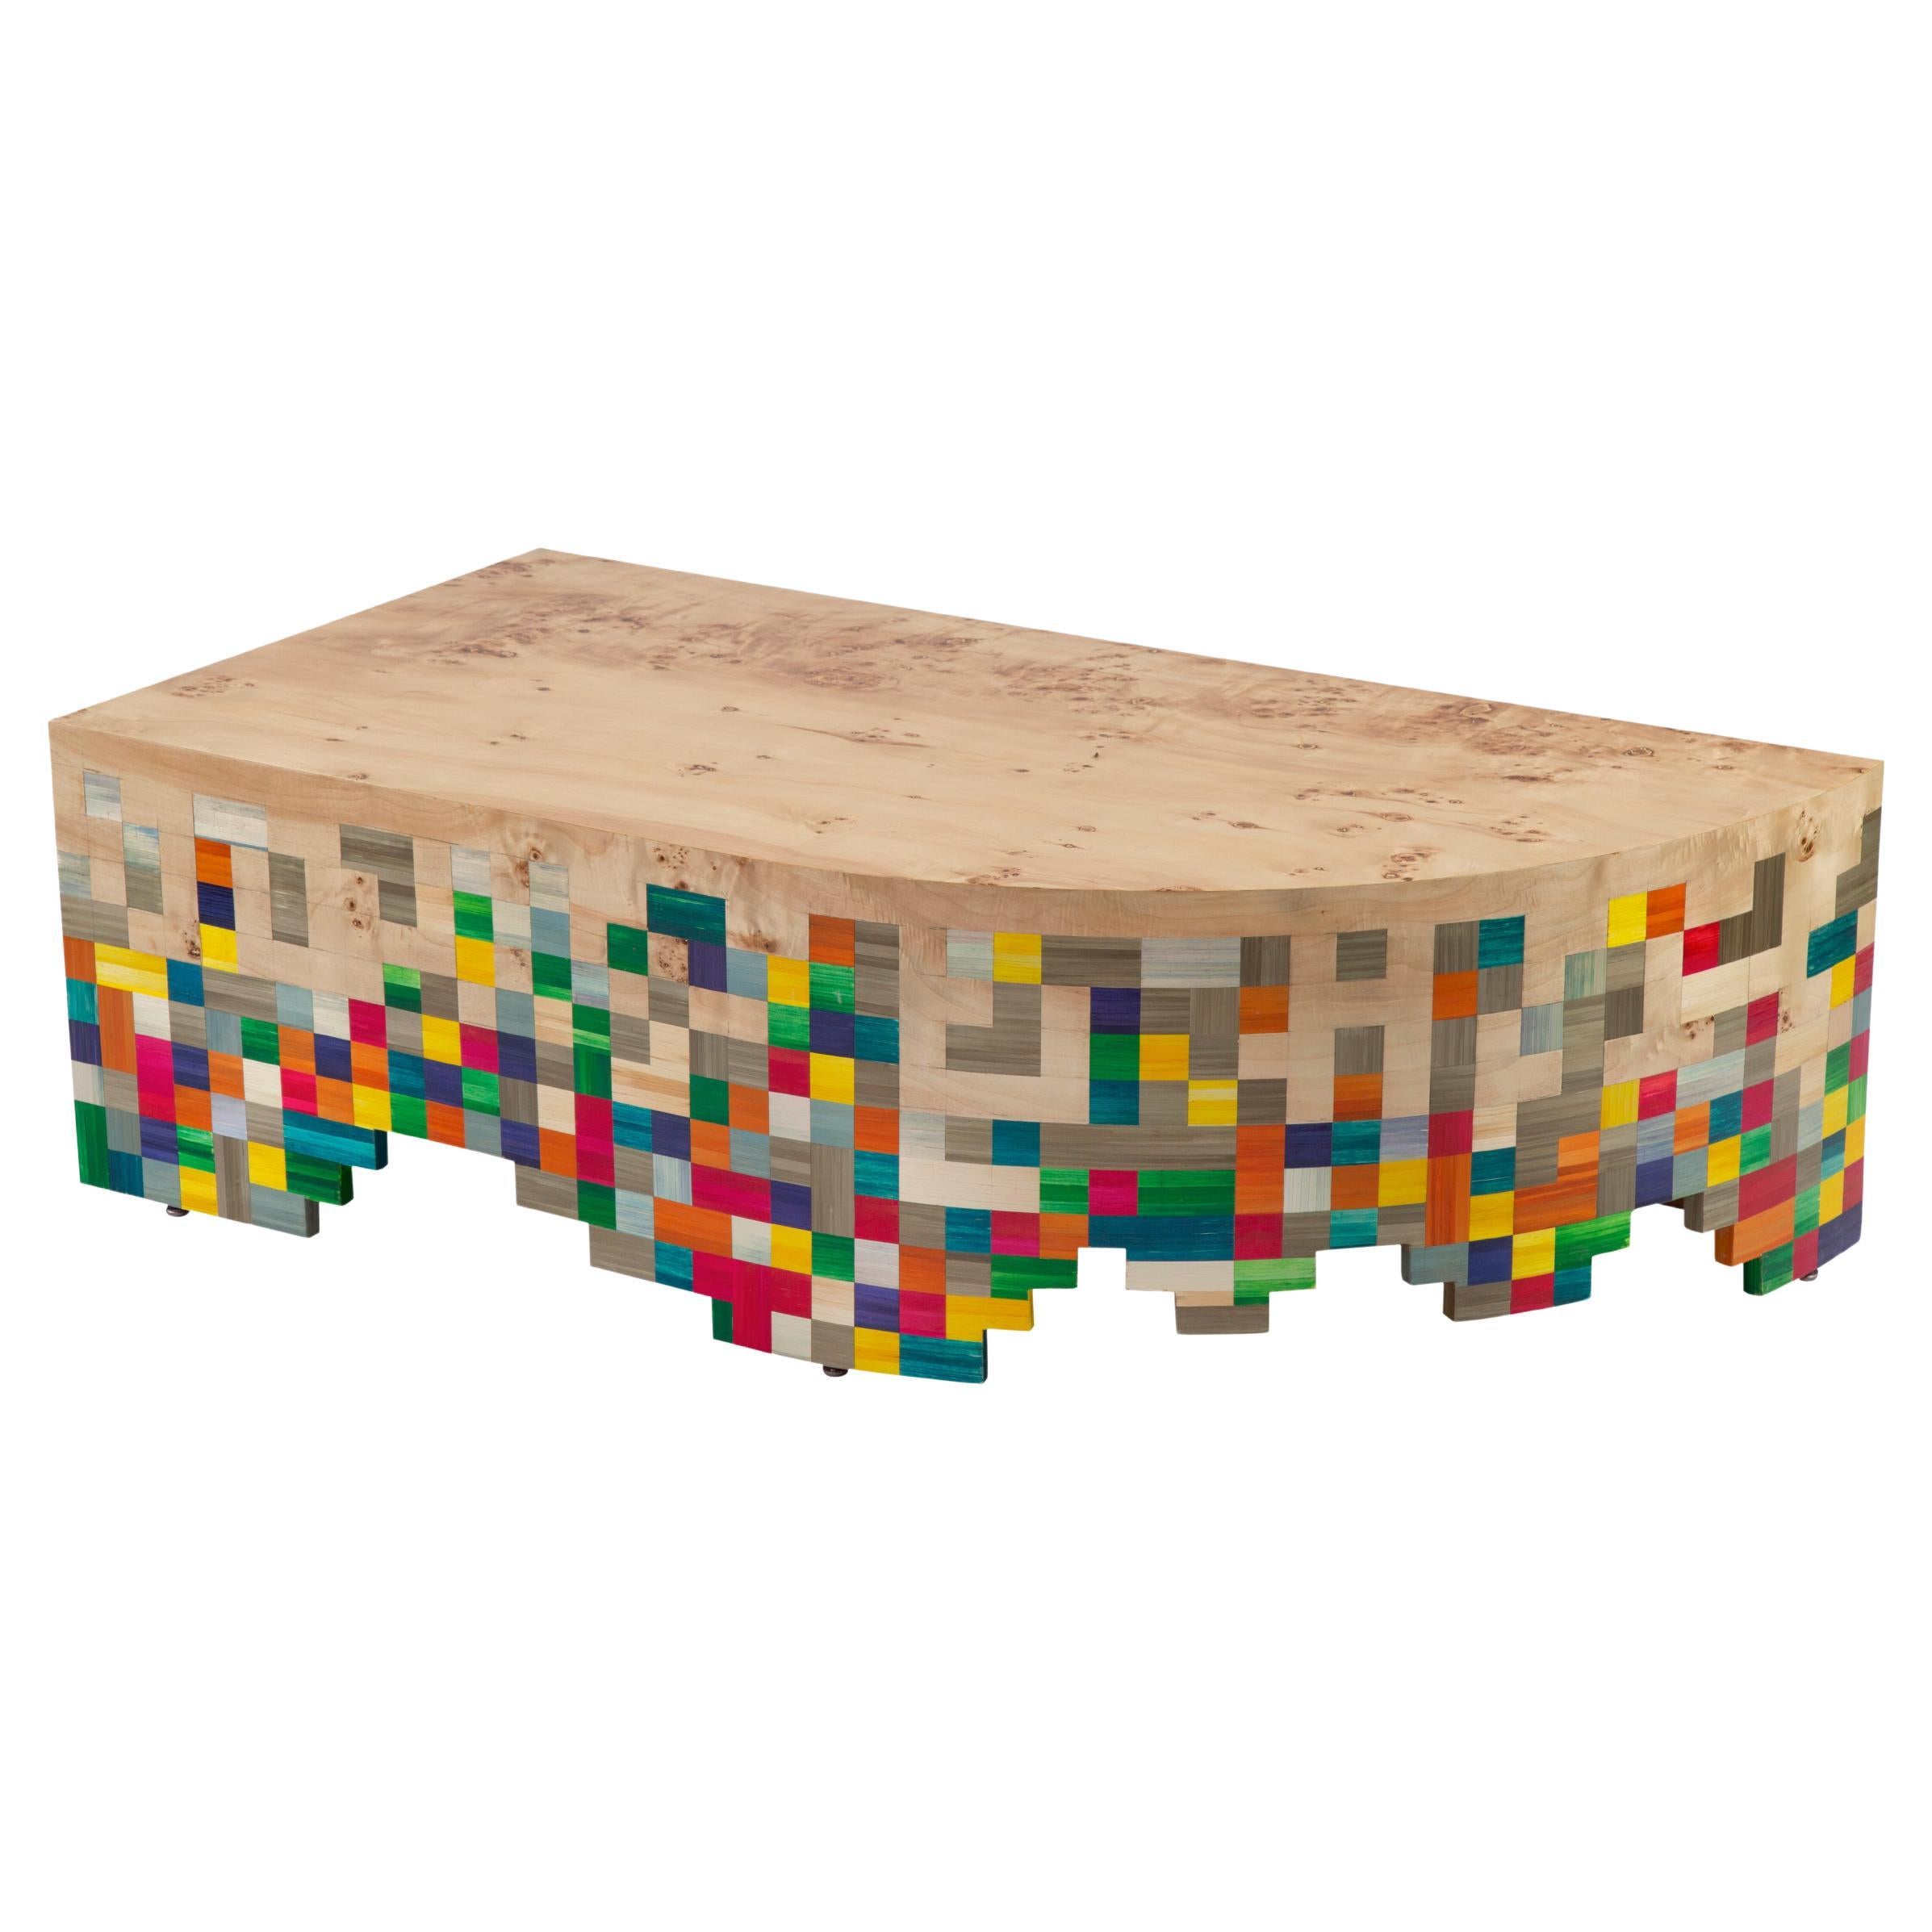 Asymmetric Colorful Hand-Laid Straw Coffee Table with Rare Apple Rind Veneer